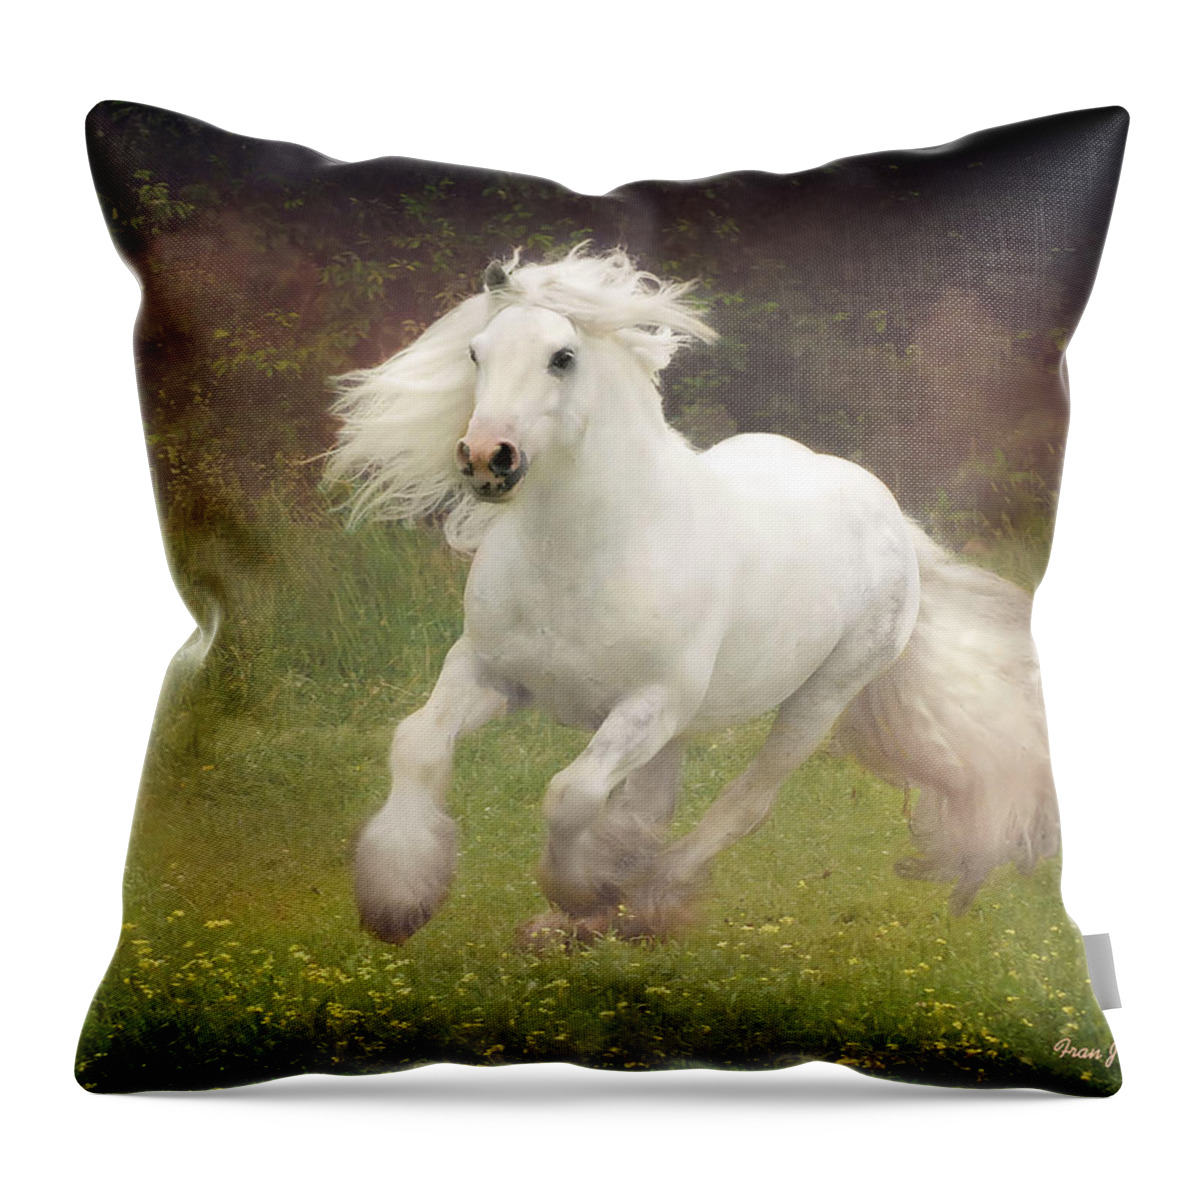 Horses Throw Pillow featuring the photograph Morning Mist C by Fran J Scott